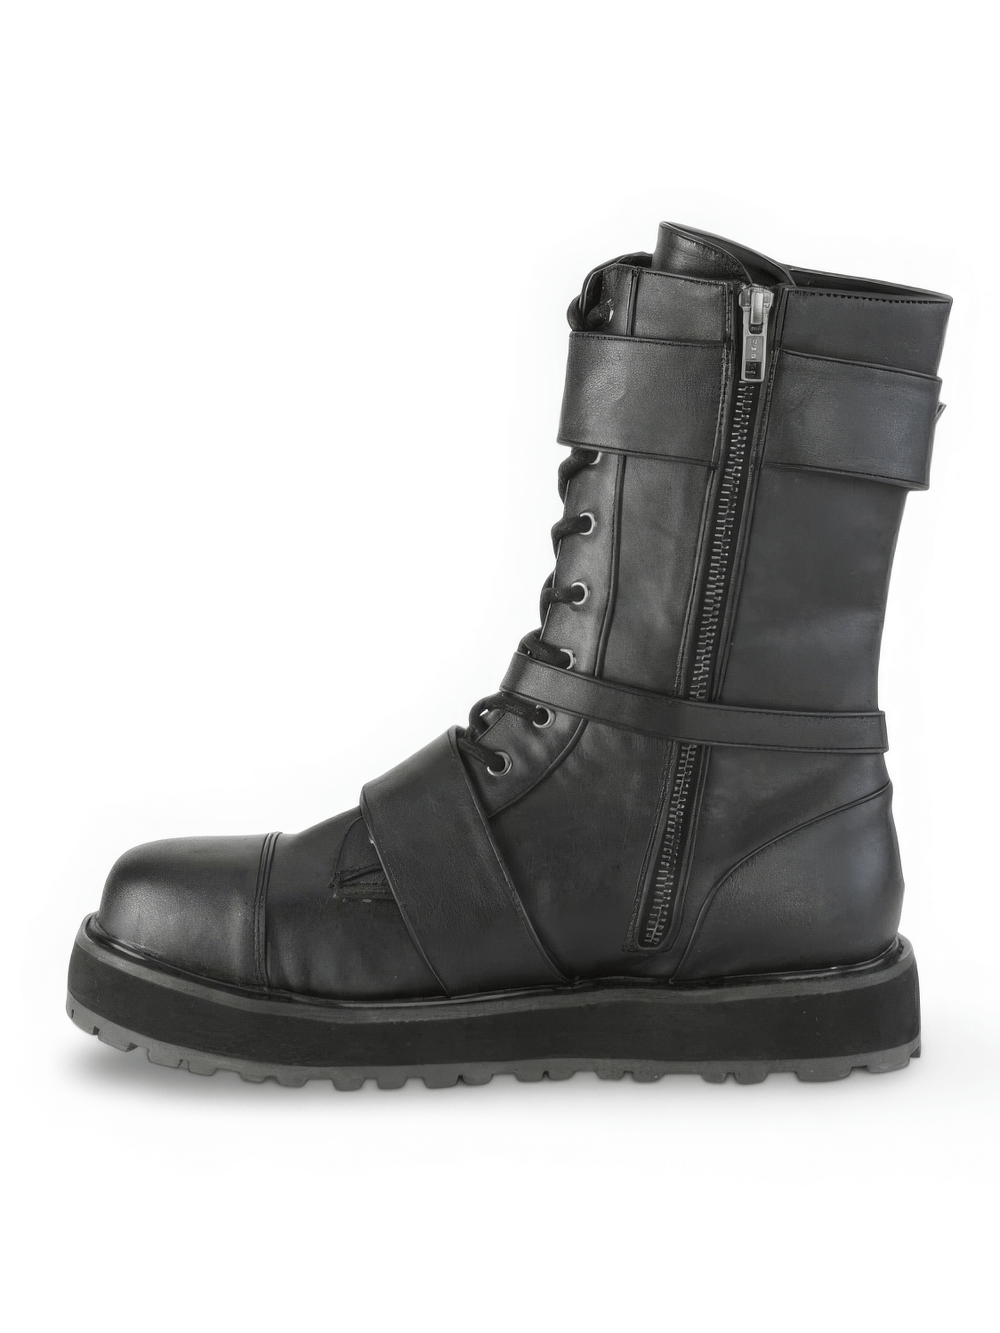 DEMONIA Mid-Calf Boots with Buckles and Metal Zipper